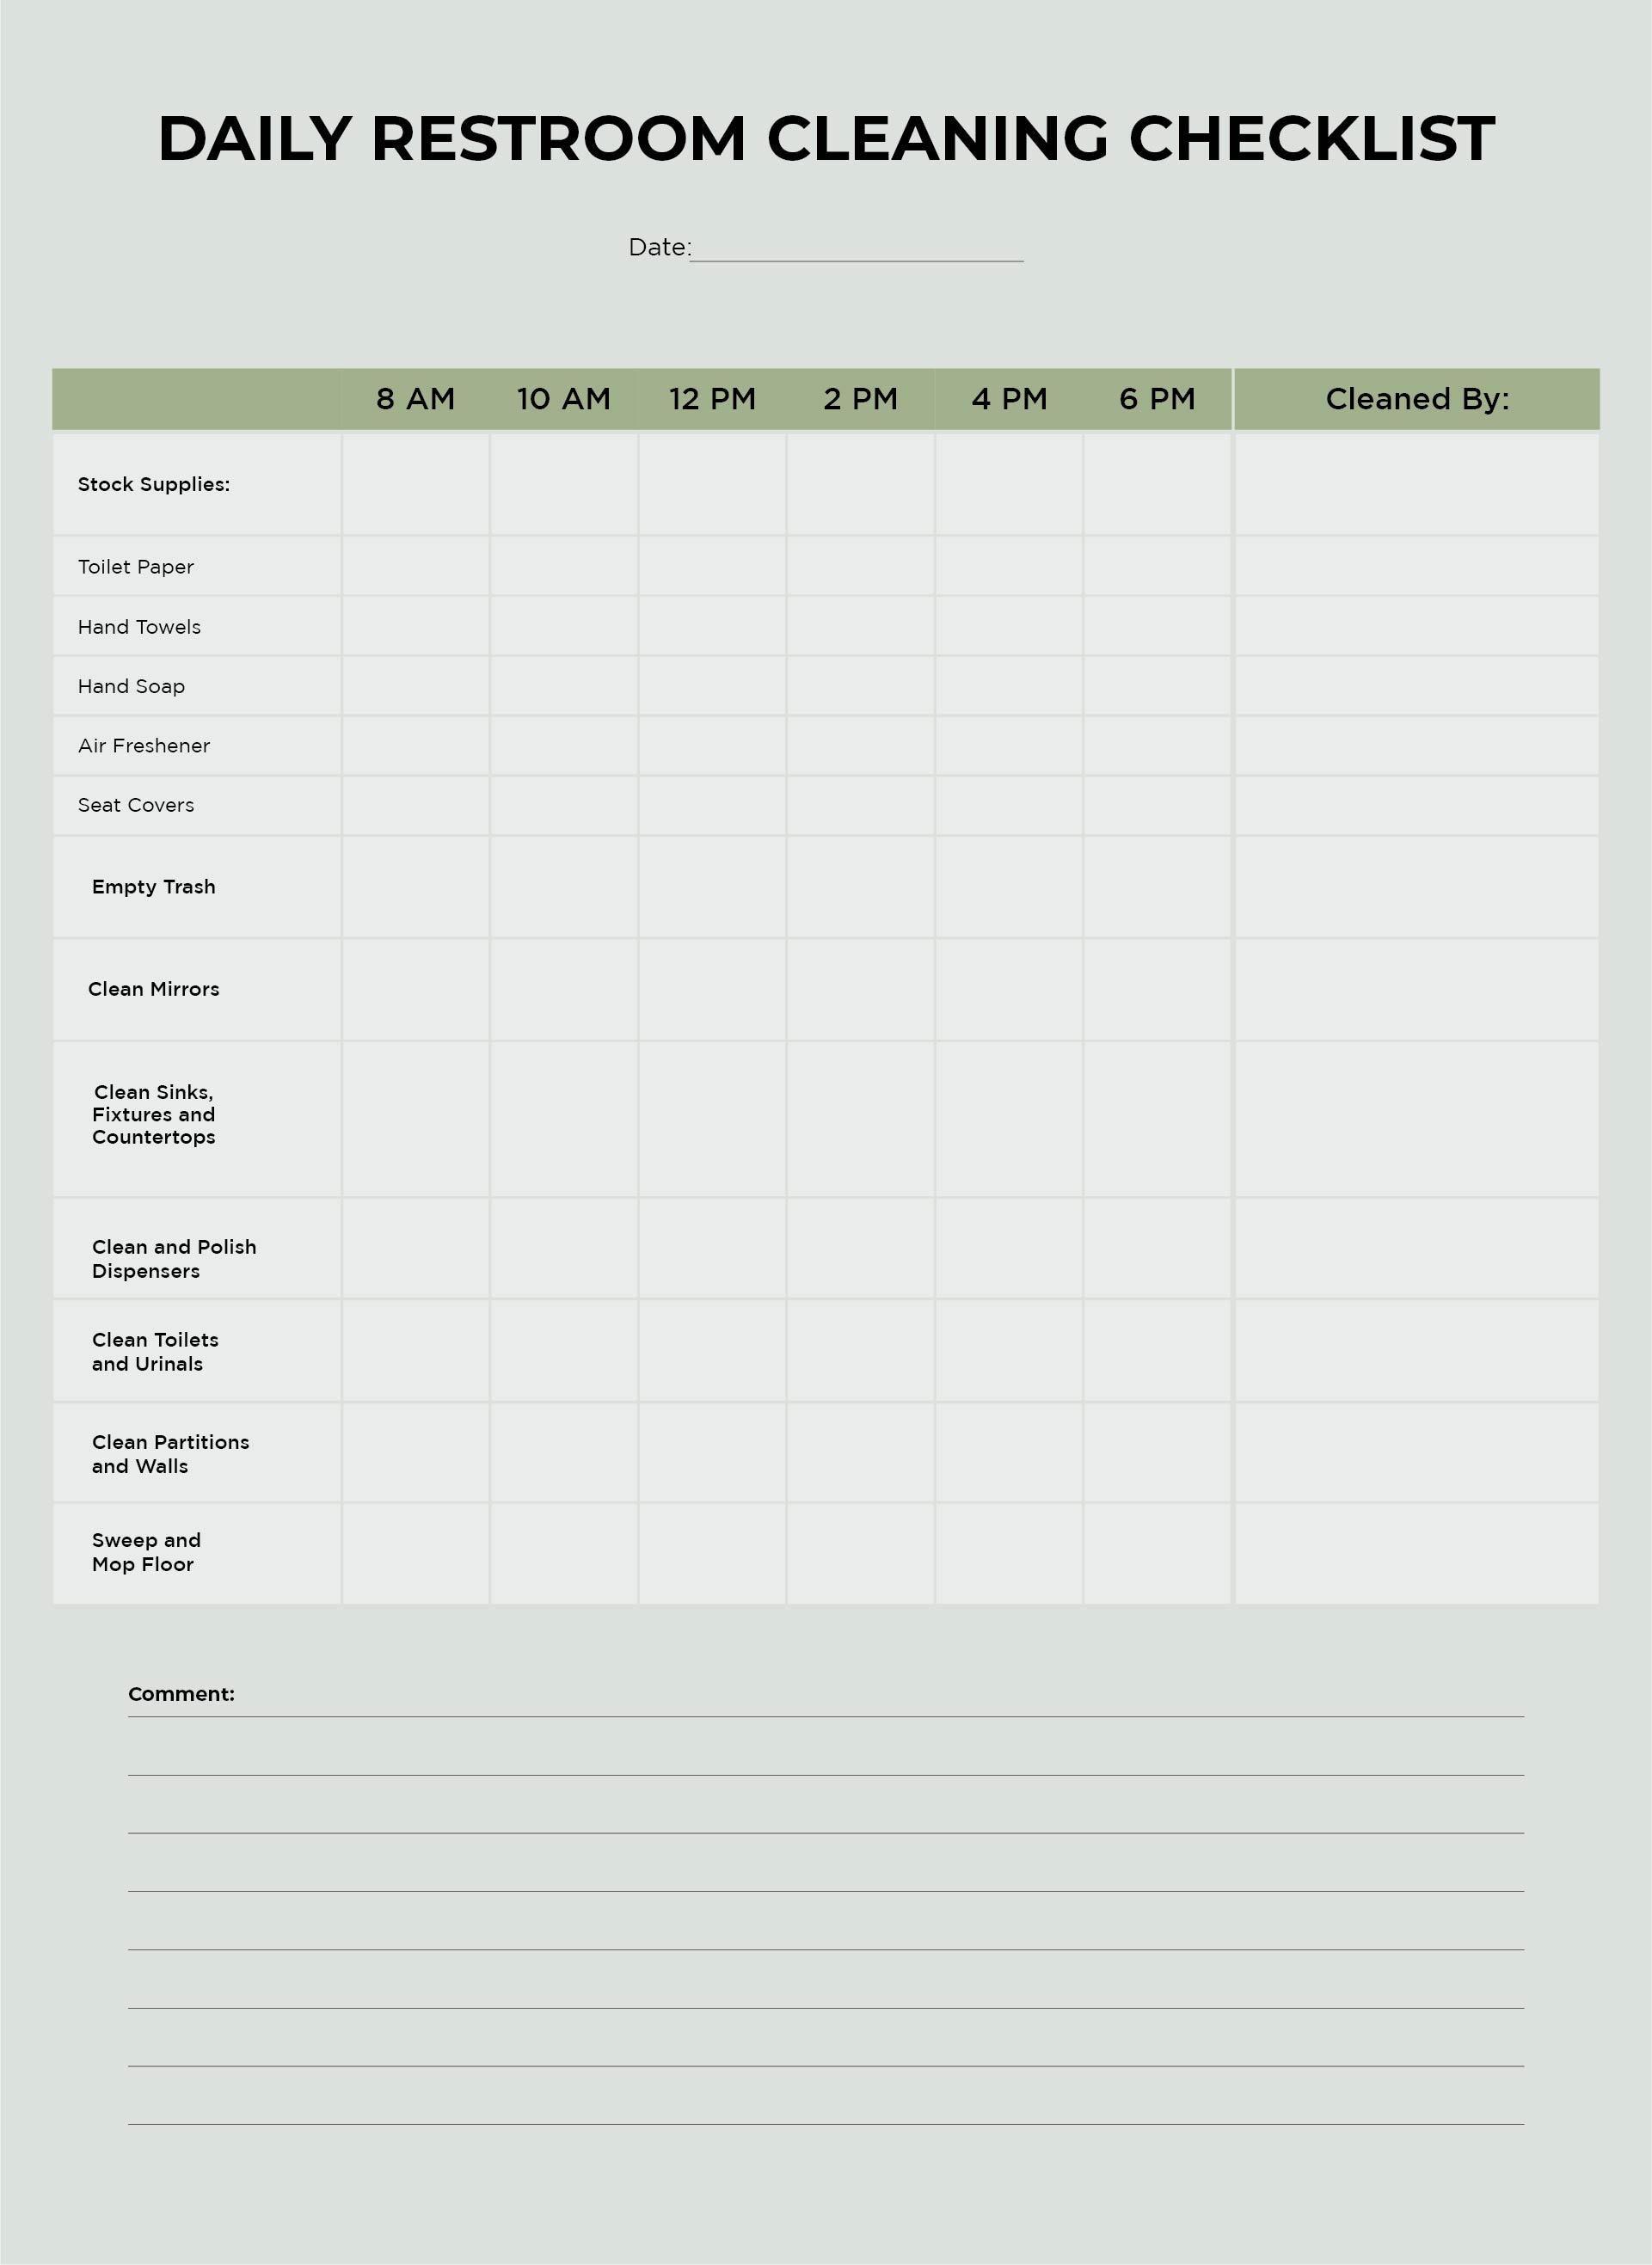 Restaurant Kitchen Cleaning Schedule Template from www.printablee.com